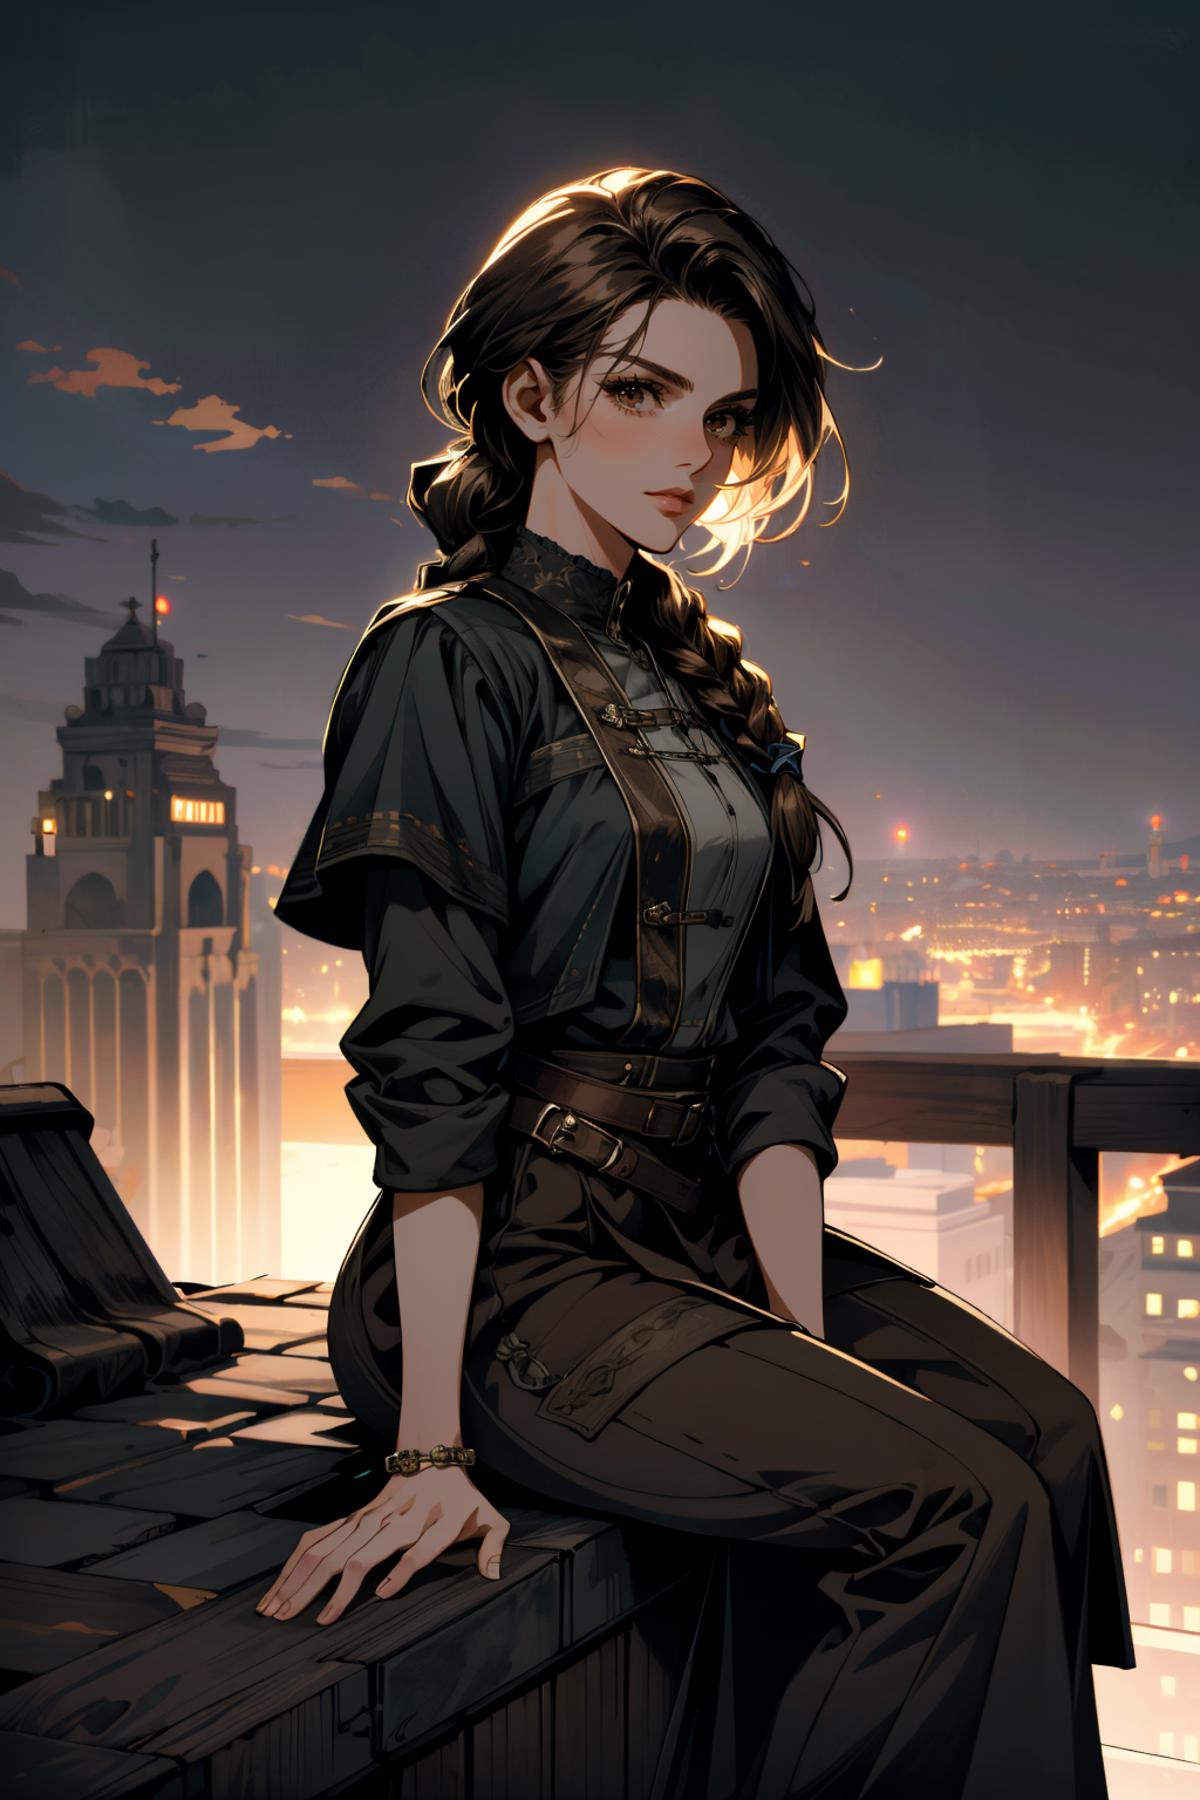 Beatrice from A Plague Tale image by BloodRedKittie